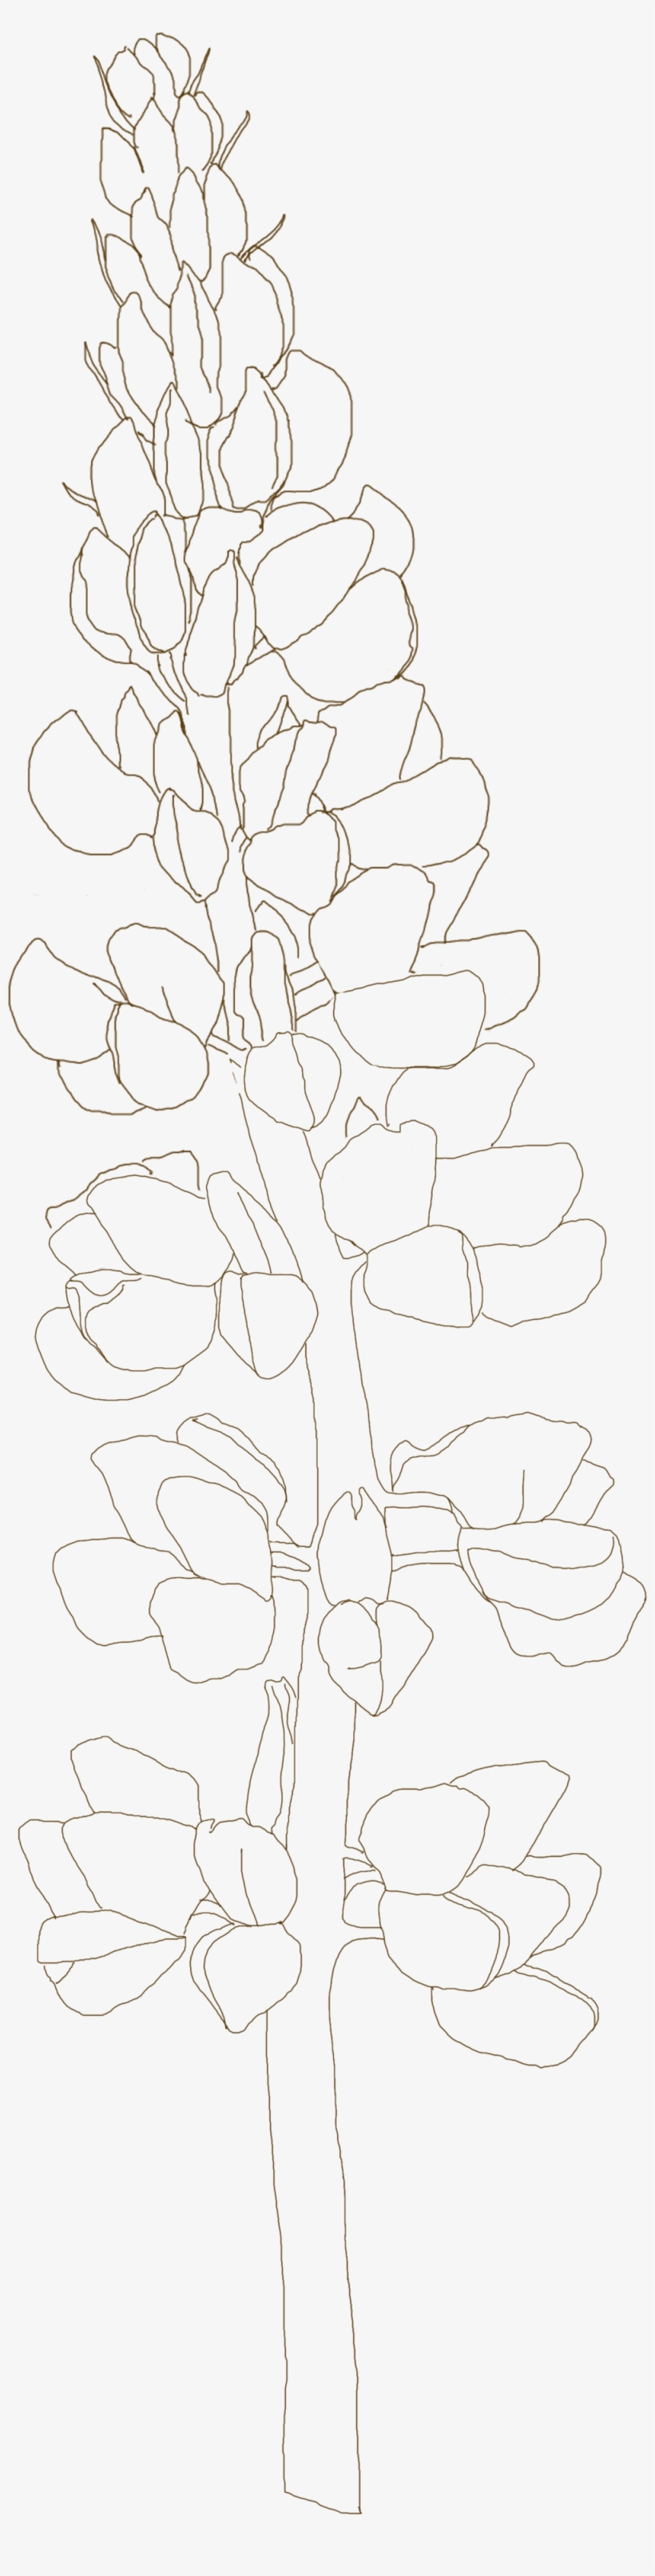 Bluebonnets Drawing Picture